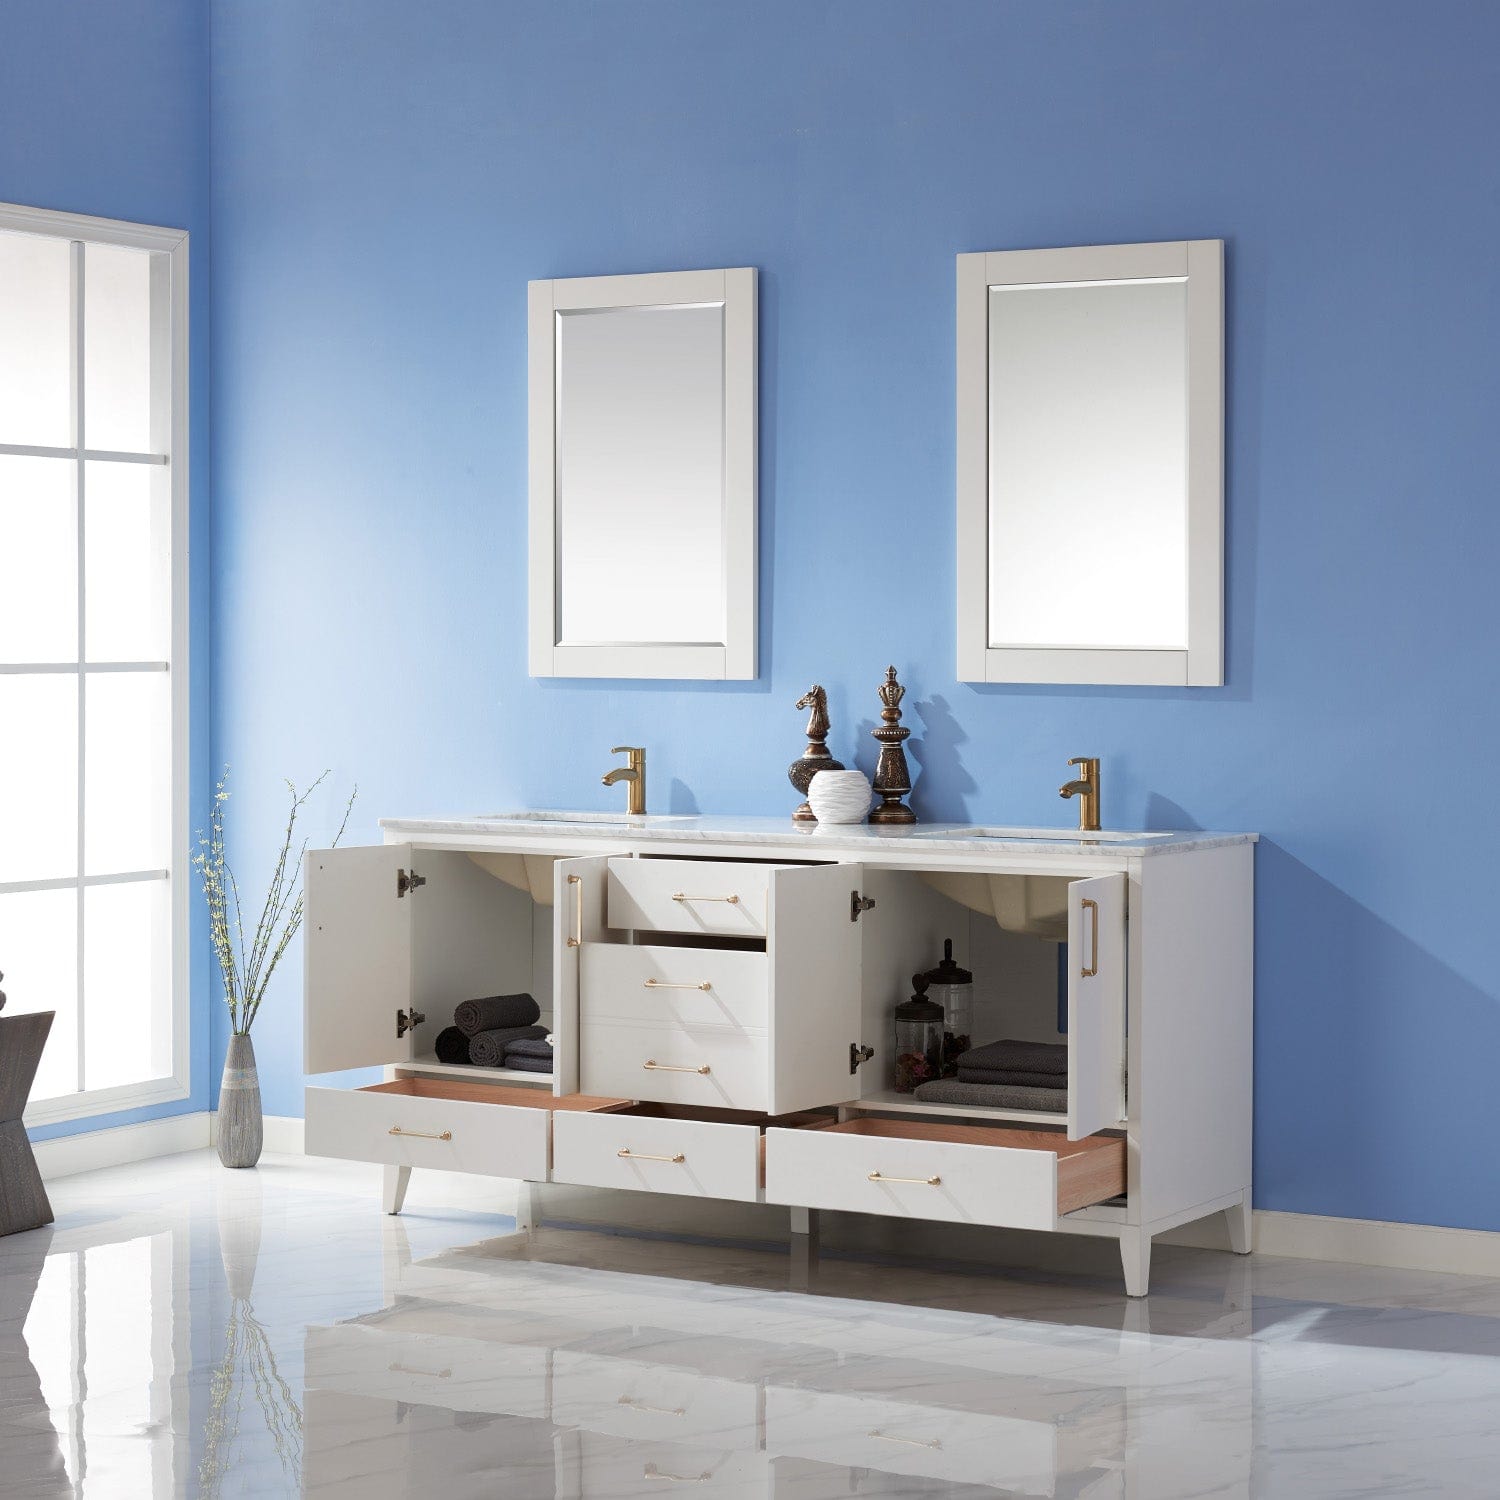 Altair Sutton 72" Double Bathroom Vanity Set in White and Carrara White Marble Countertop with Mirror 541072-WH-CA - Molaix631112972031Vanity541072-WH-CA